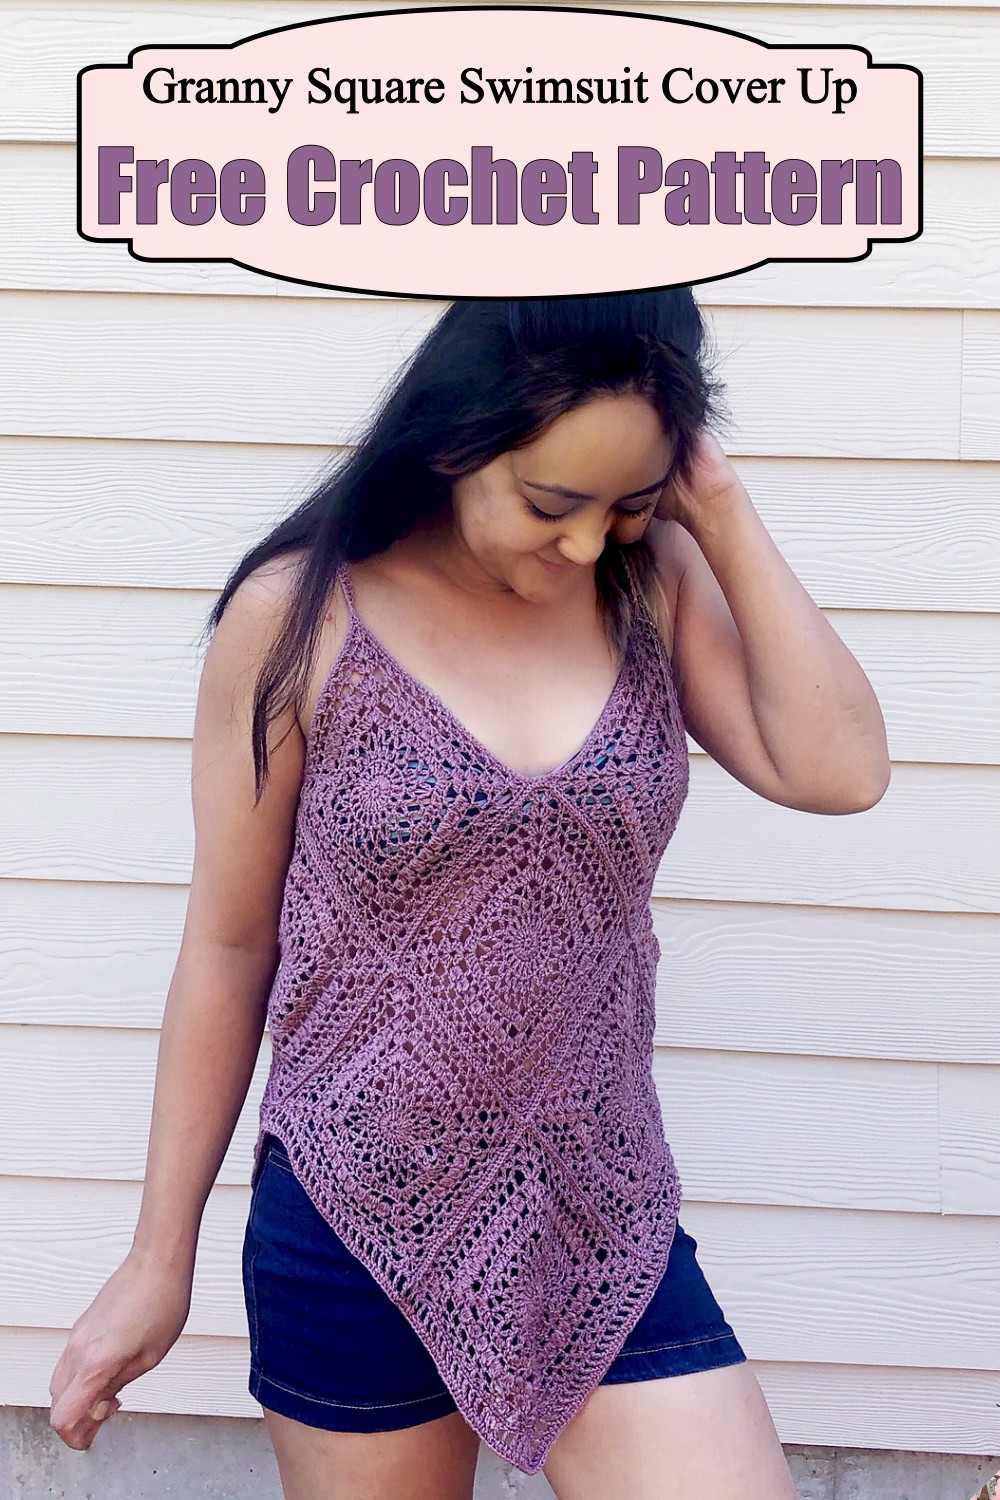 Granny Square Swimsuit Cover Up